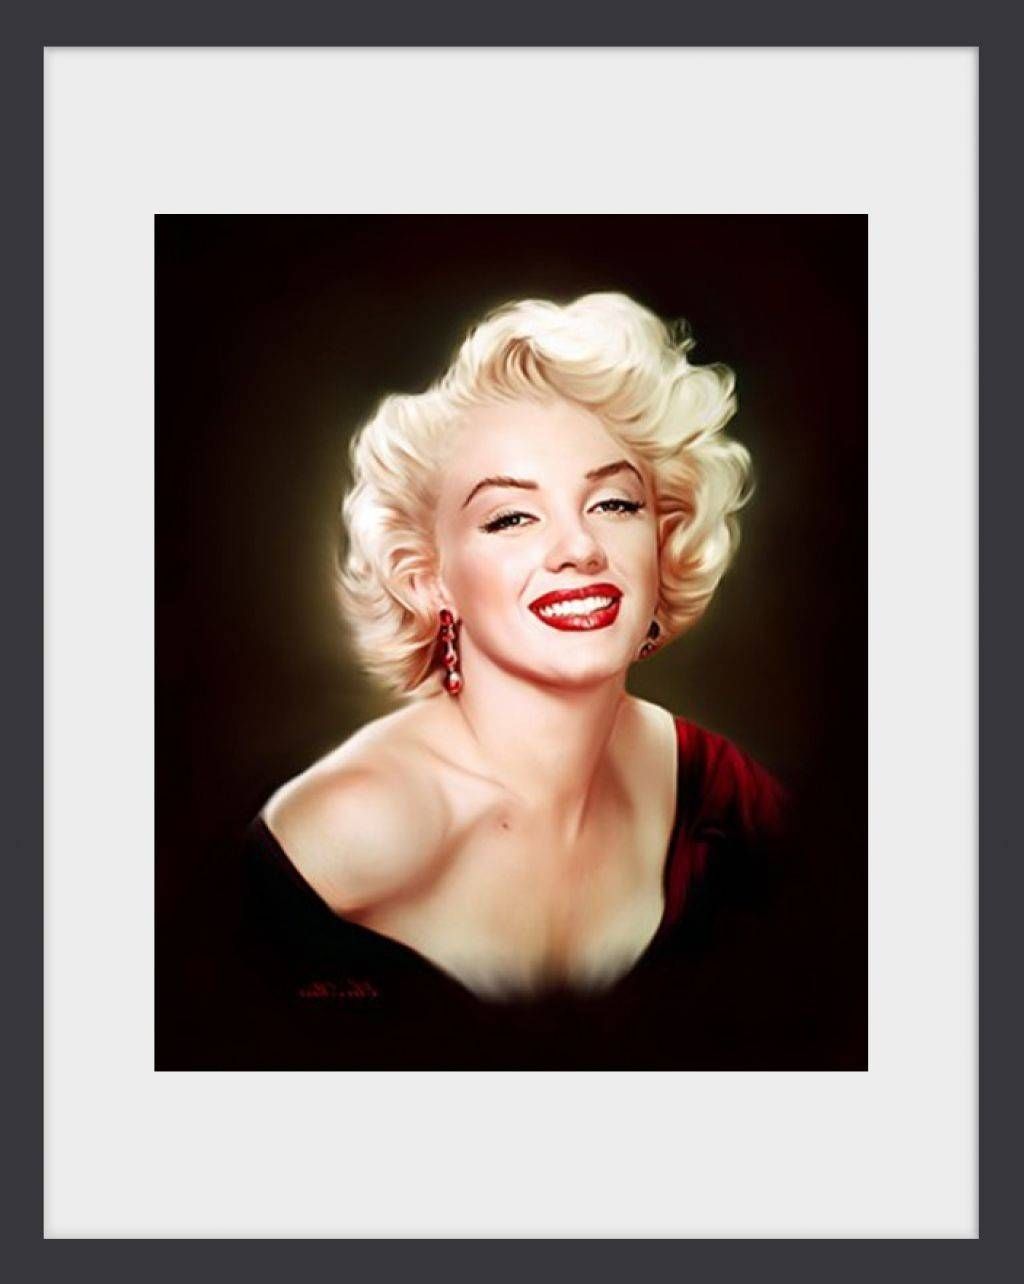 Marilyn Monroe Framed Pictures Walmart ~ Idoorframe Intended For Most Recent Marilyn Monroe Framed Wall Art (View 13 of 22)